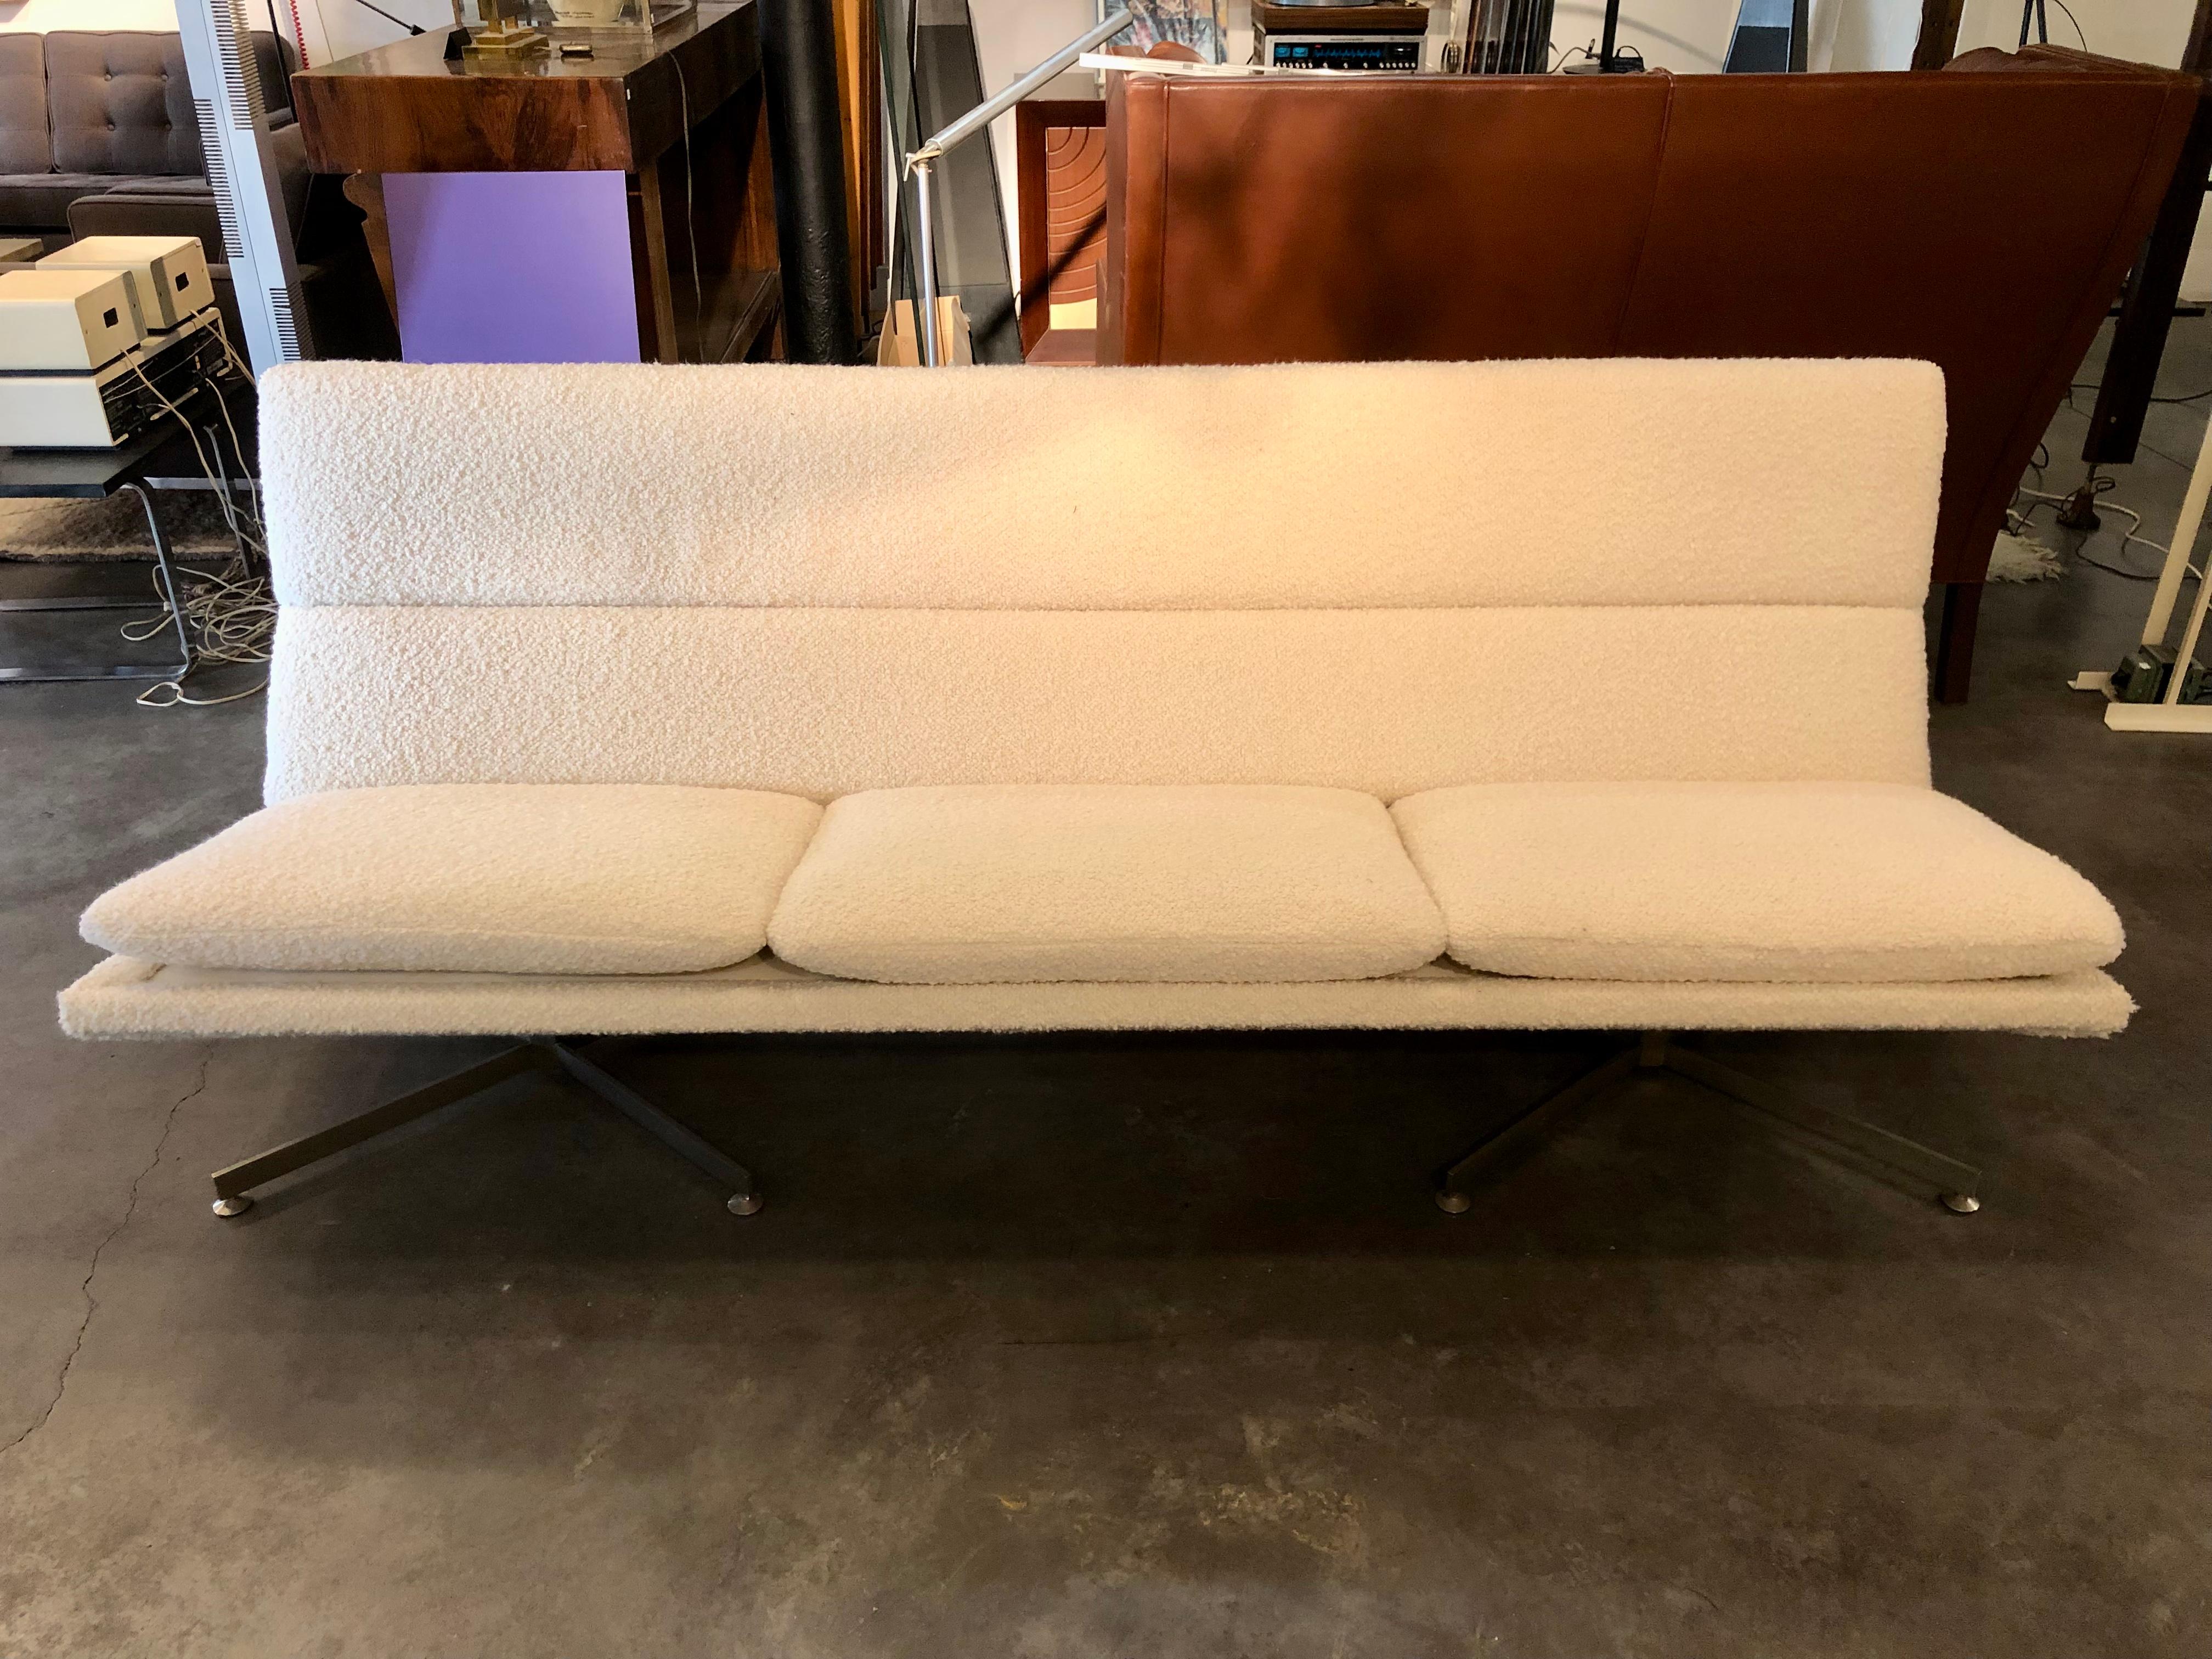 Mid-Century Modern Big Linear Sofa from the Sixties by George van Rijck for Beaufort